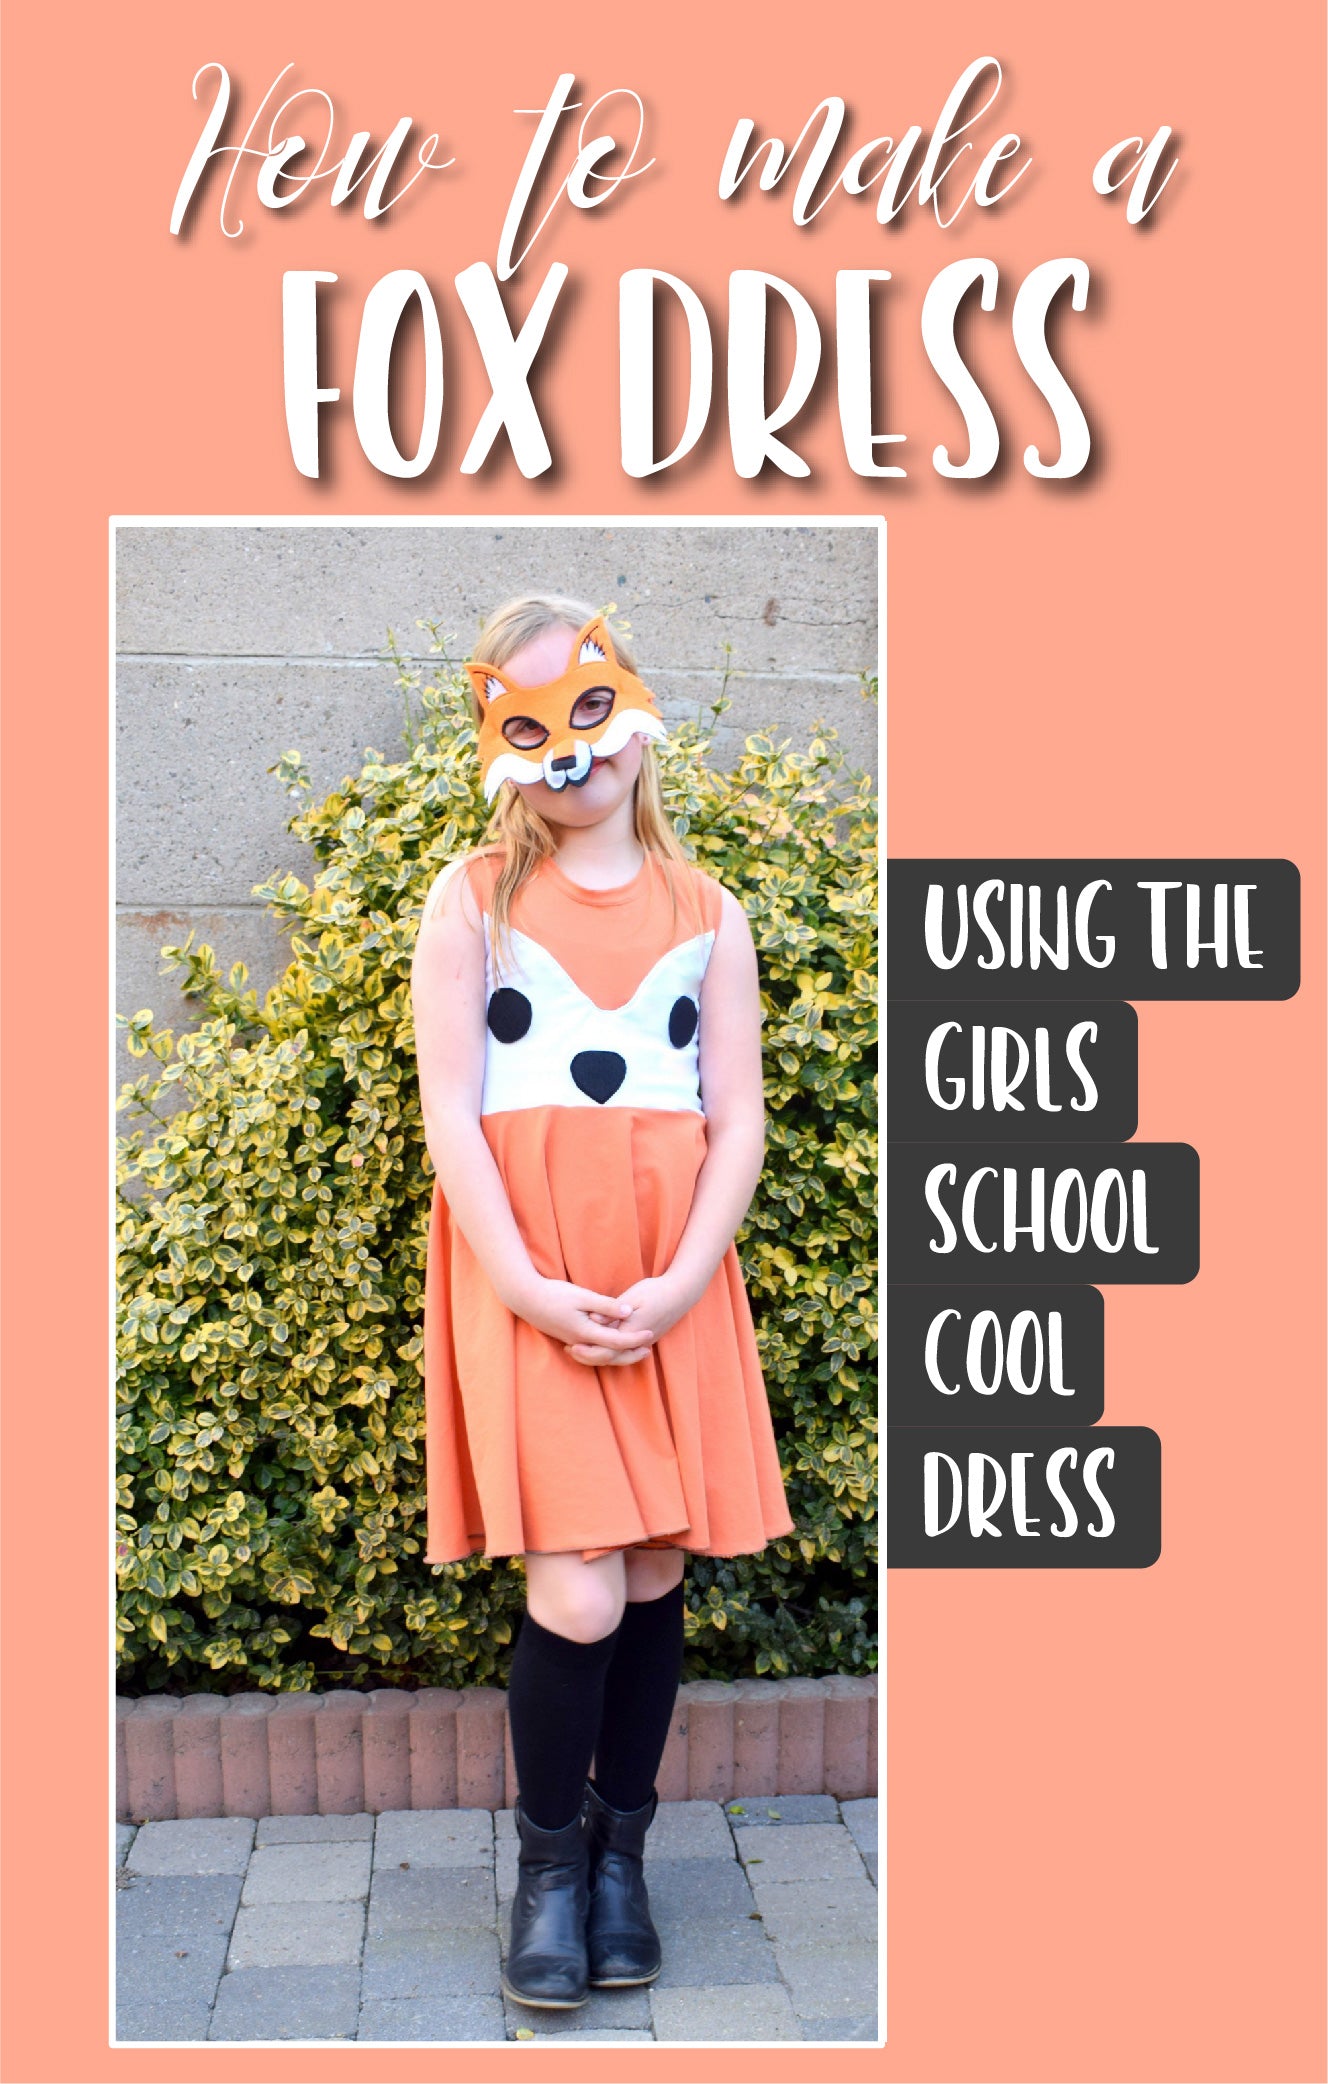 How to make a fox dress from the School Cool Dress